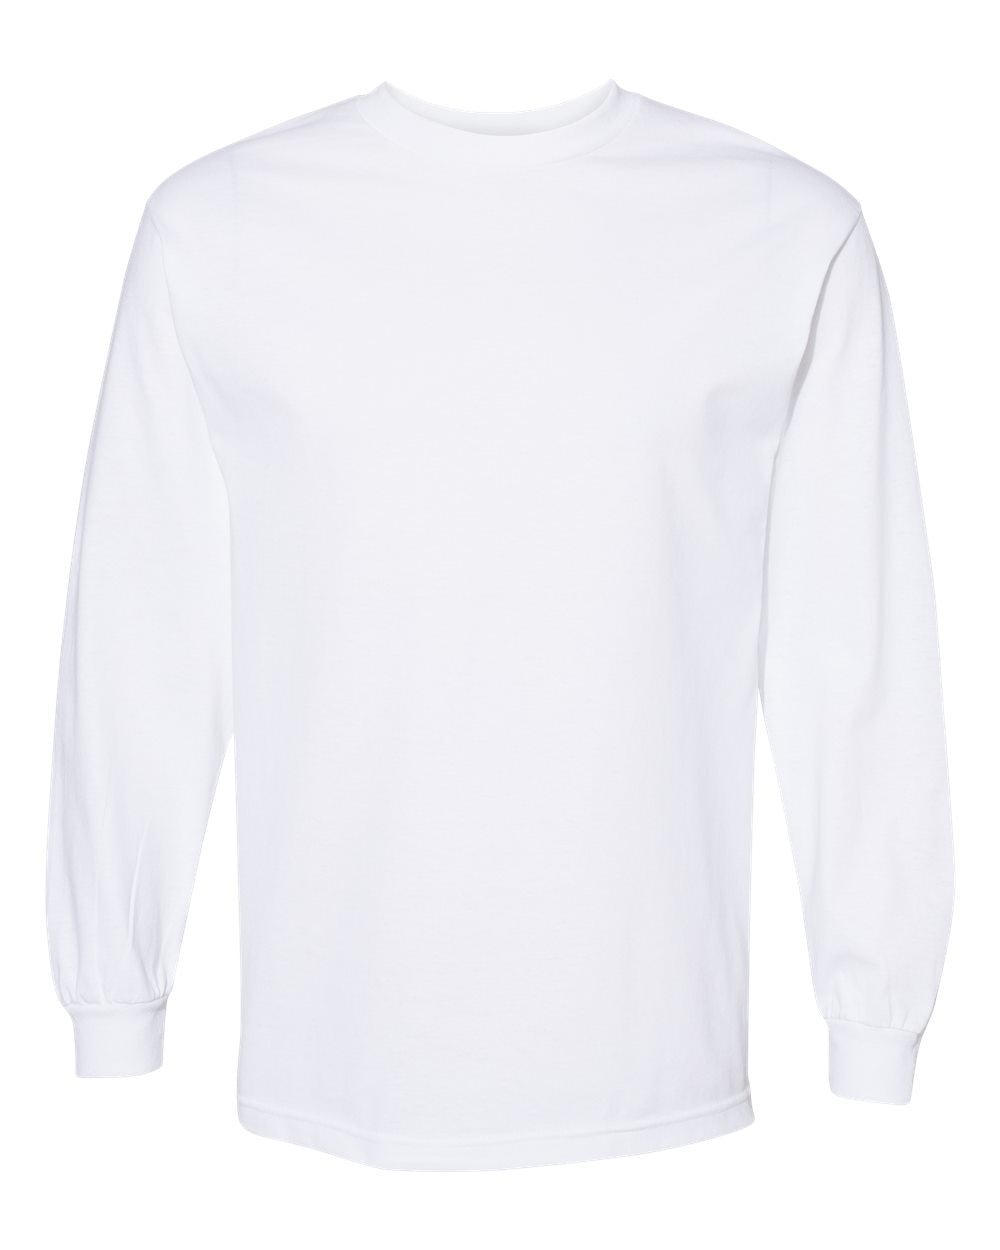 American Apparel Unisex Heavyweight Cotton Long Sleeve Tee 1304 #color_White